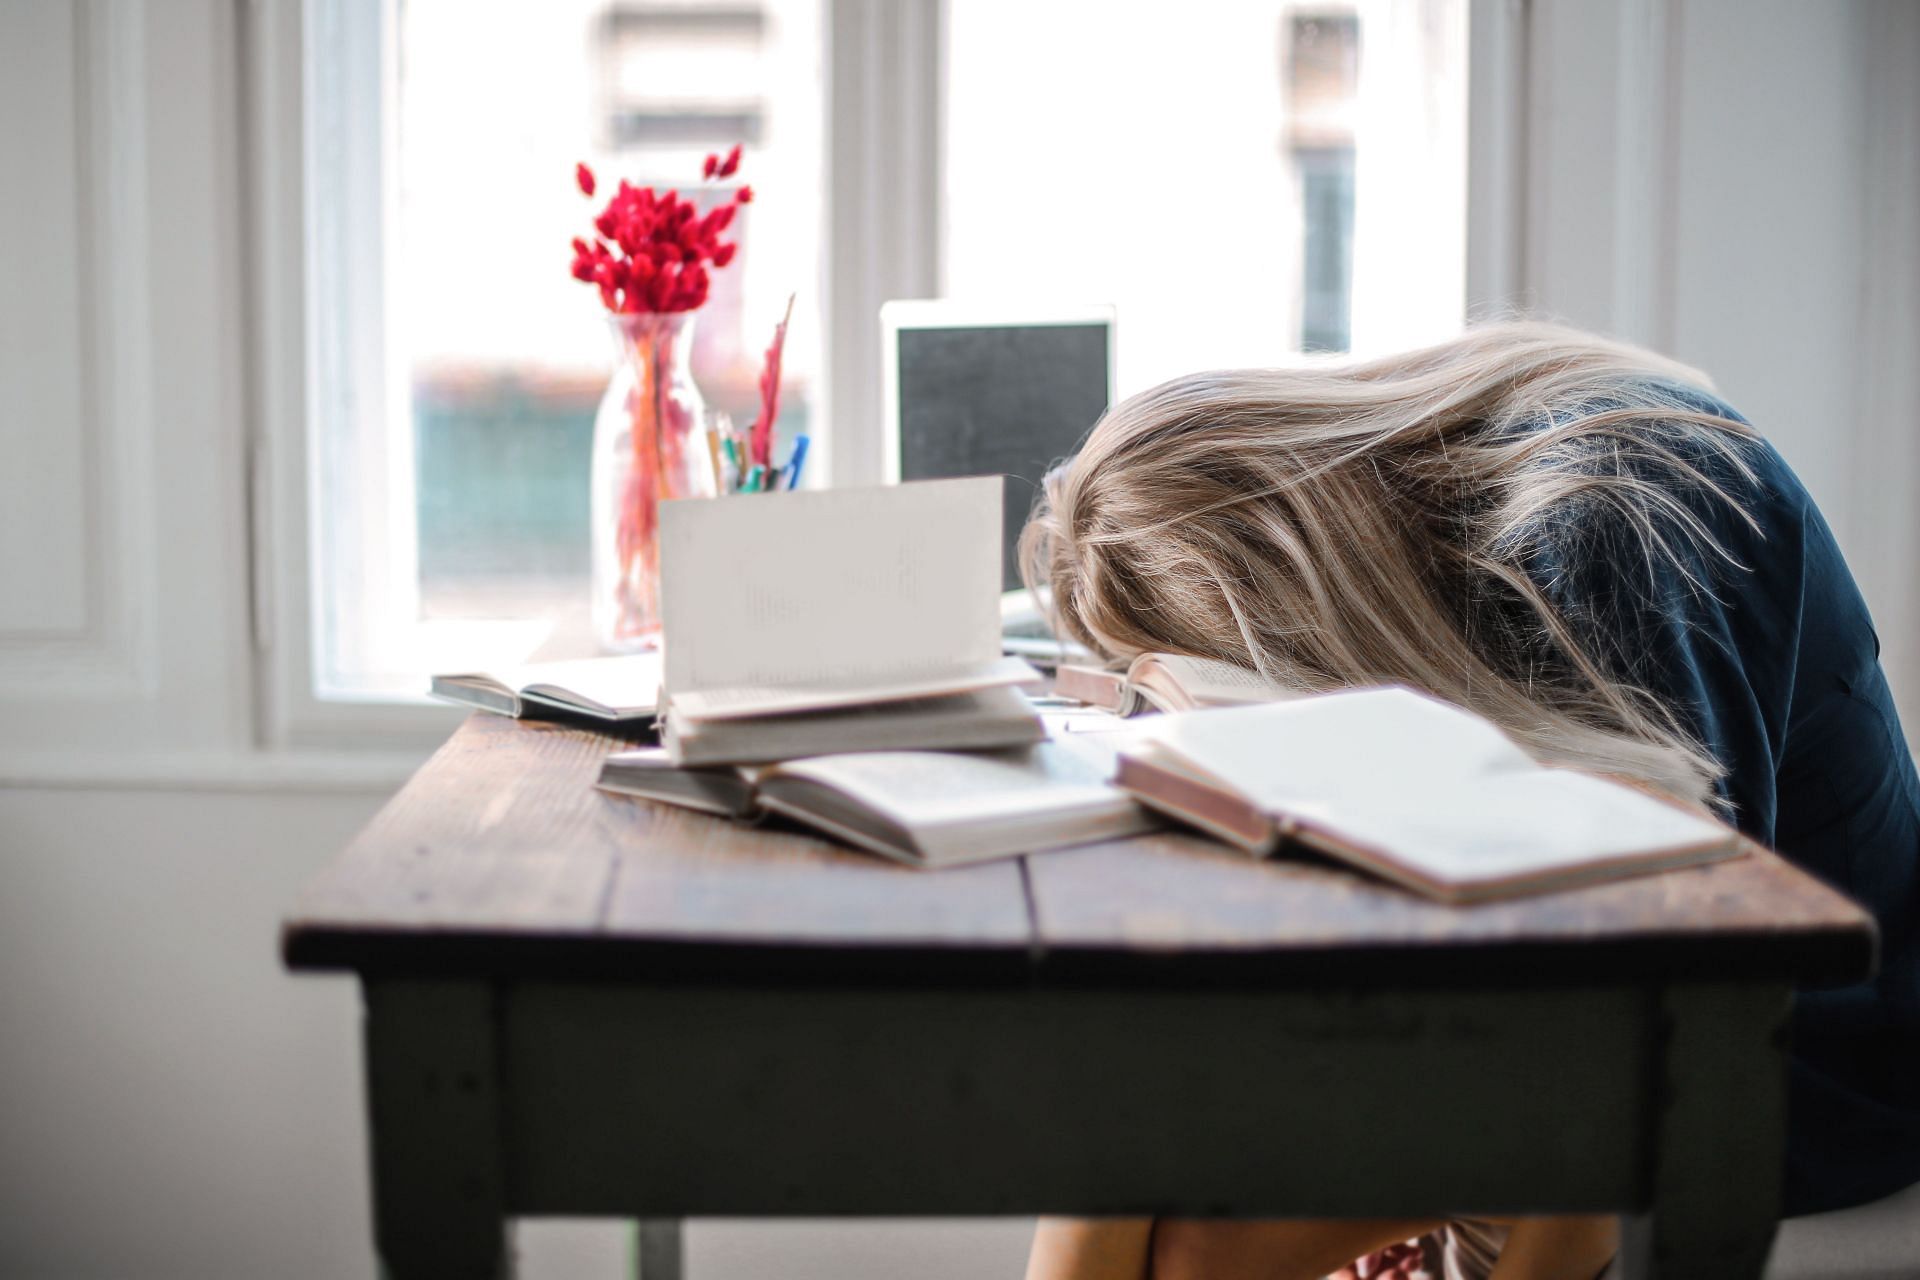 Nutritional deficiency can cause make you tired. (Image via Pexels/ Andrea Piacquadio)